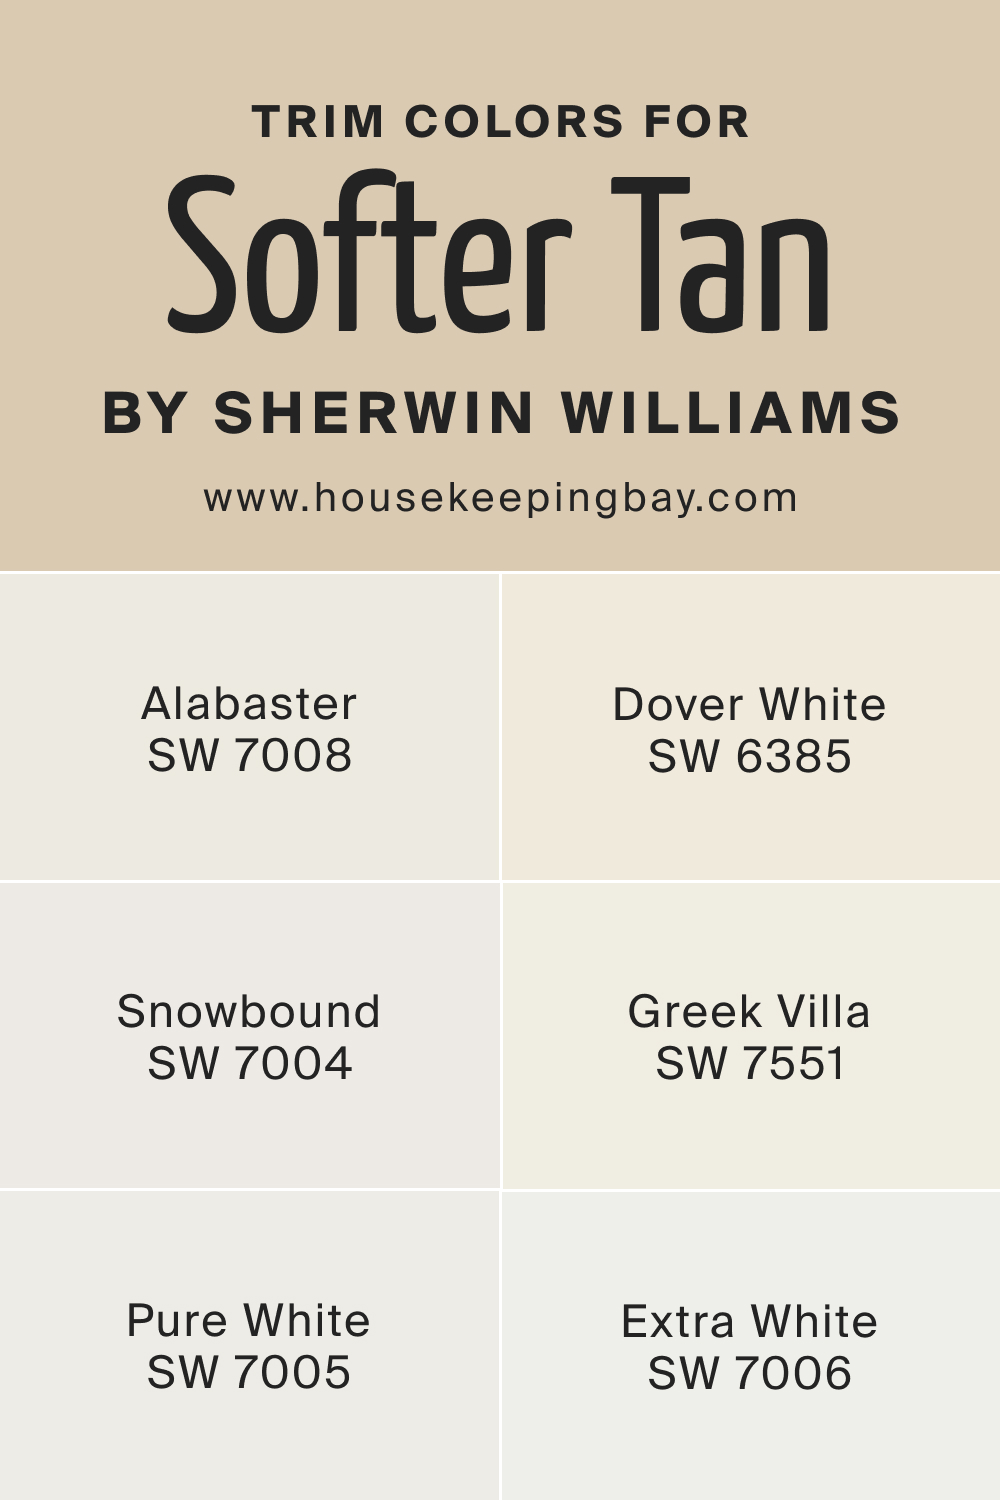 What Is the Best Trim Color to Use With SW Softer Tan